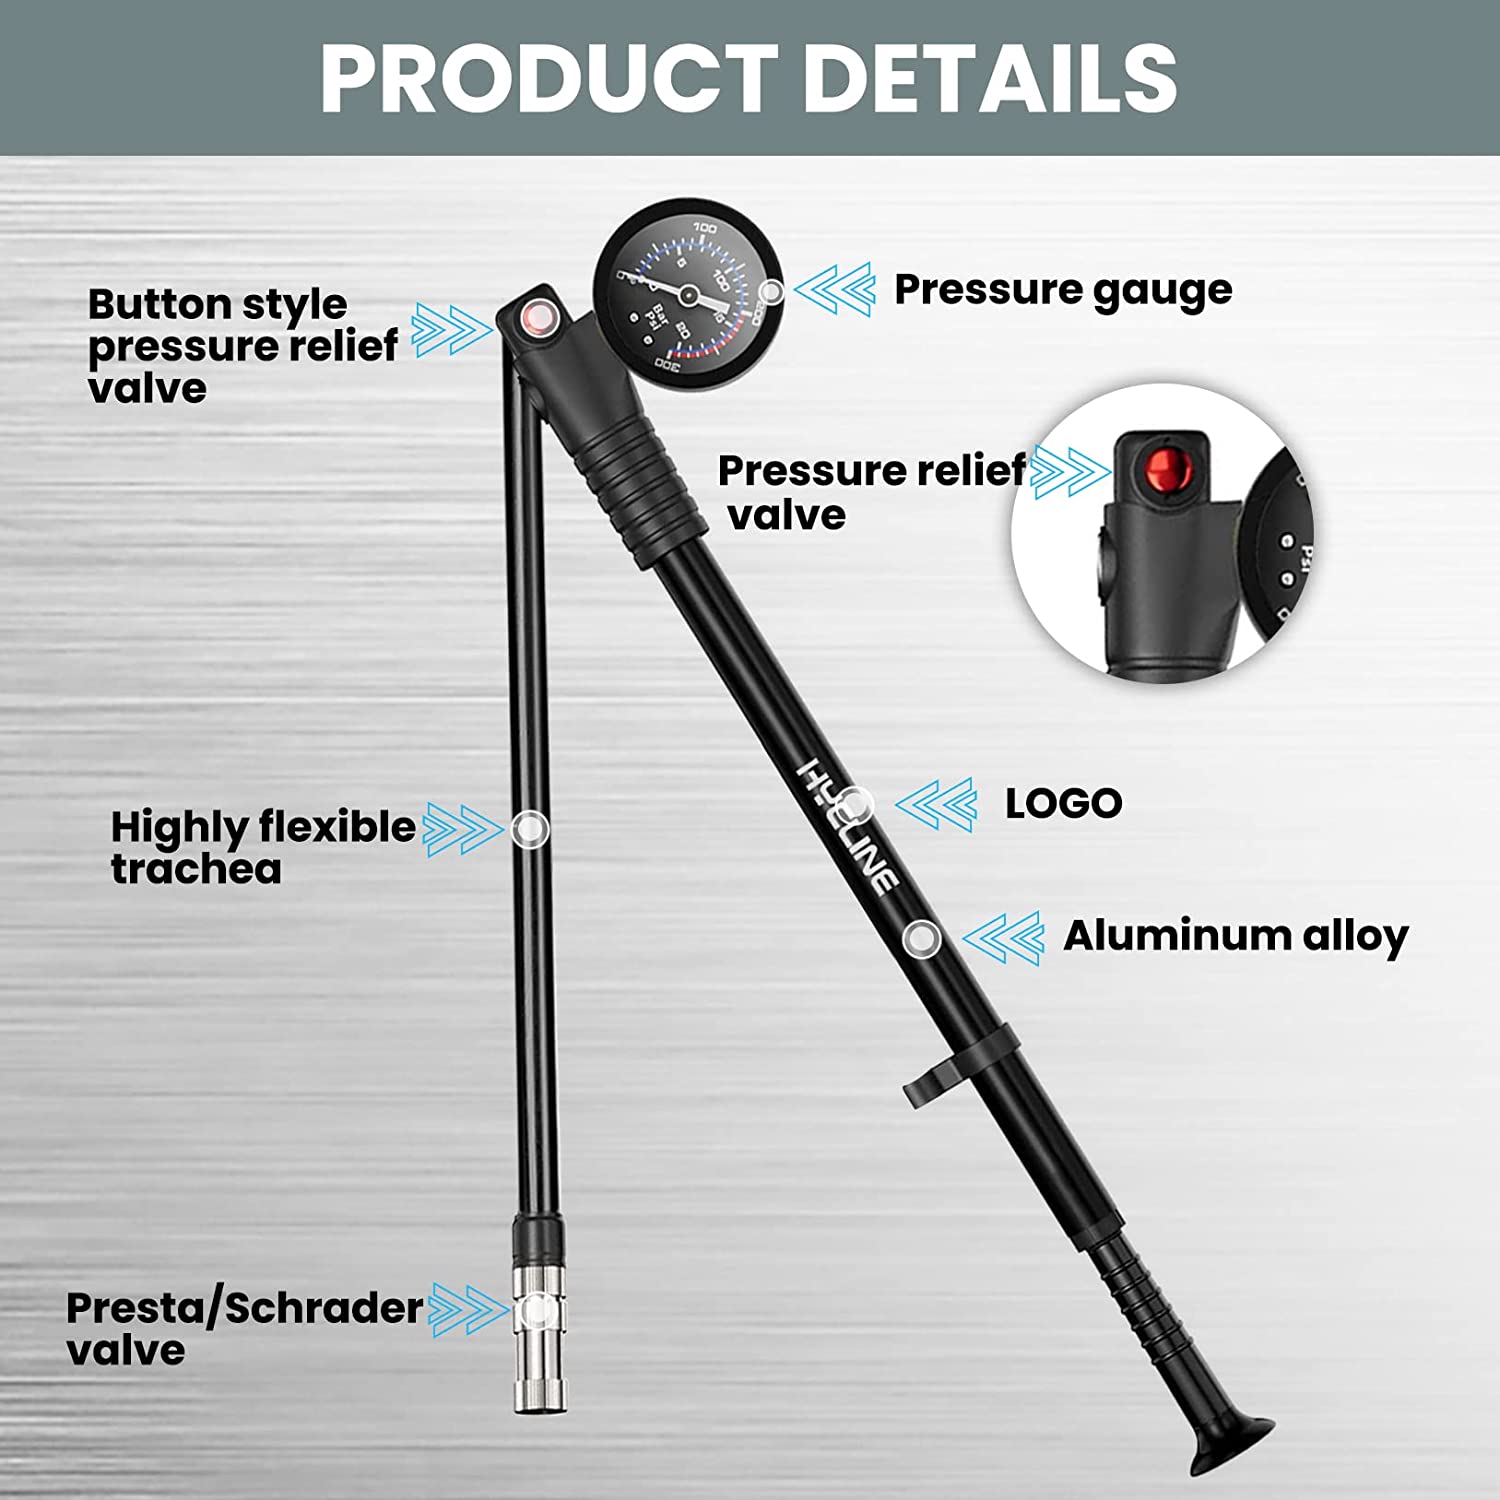 300 PSI High-pressure Bicycle Shock Pump with Gauge product details